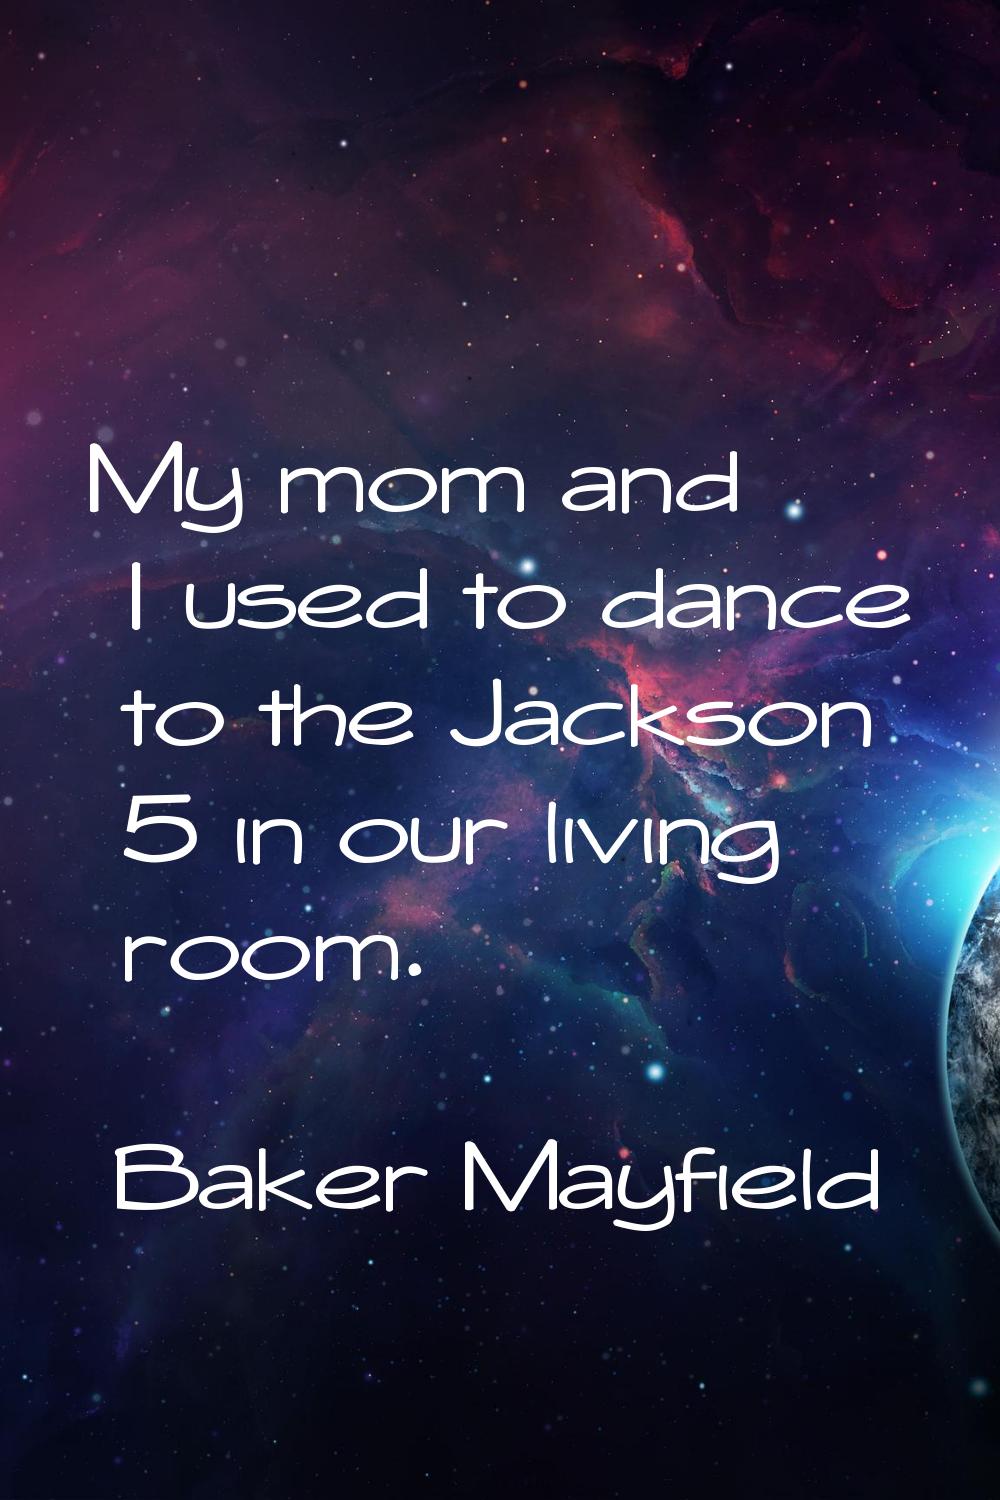 My mom and I used to dance to the Jackson 5 in our living room.